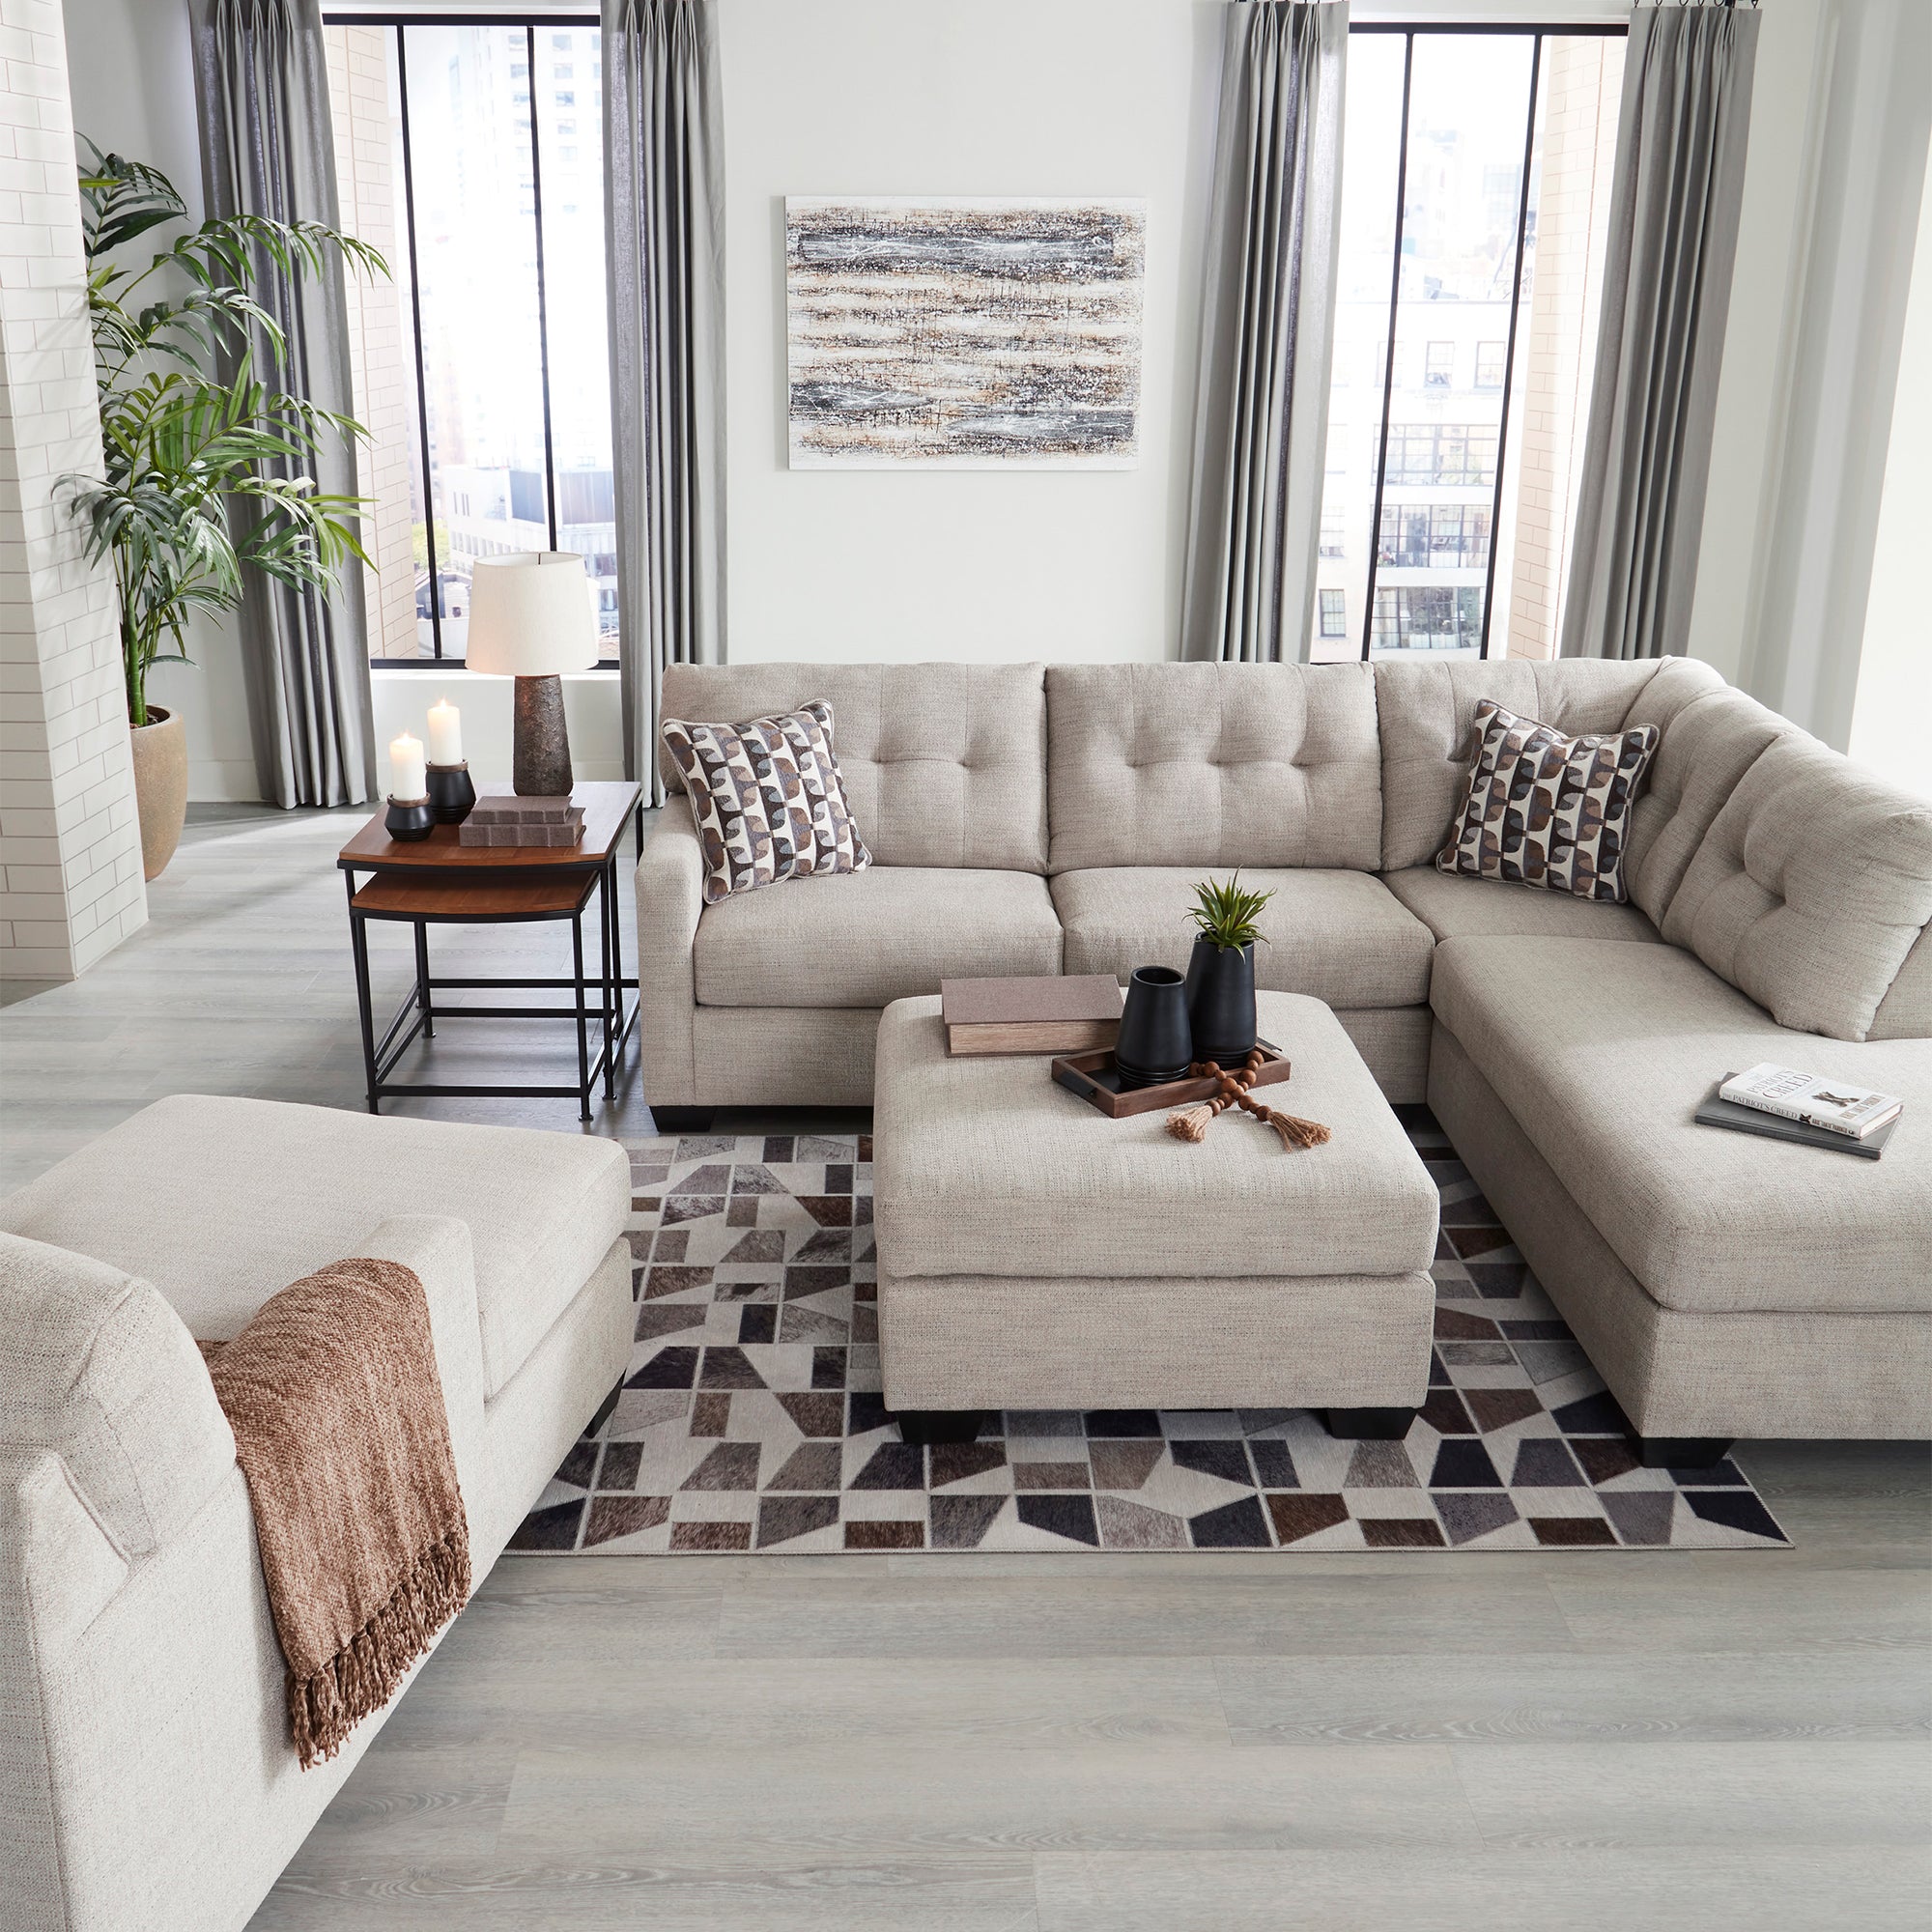 Sleek and stylish Mahoney 2-Piece Sectional in pebble, designed for sophisticated Milwaukee interiors